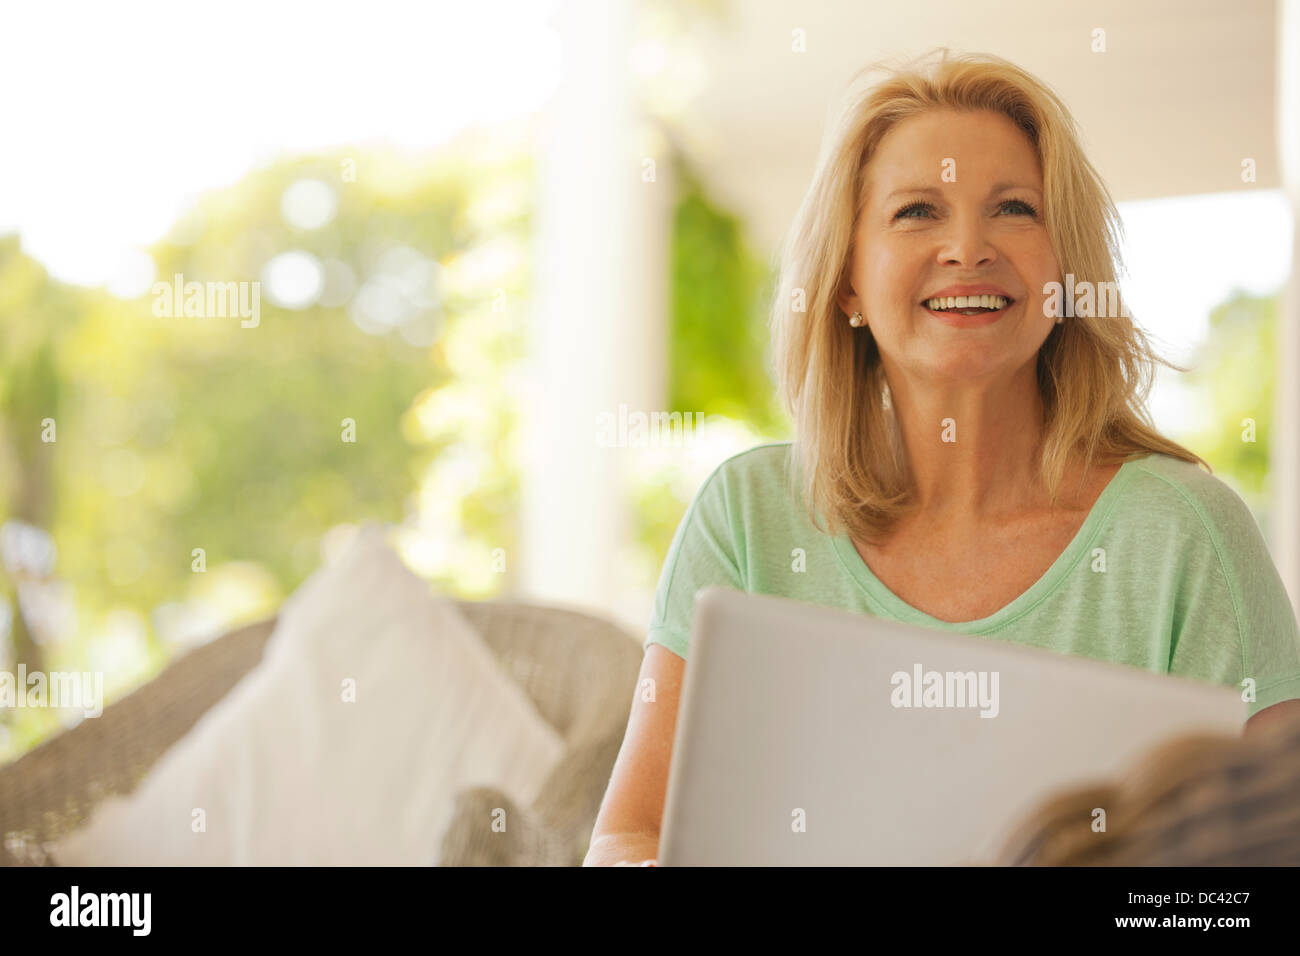 Smiling woman using laptop on patio Banque D'Images